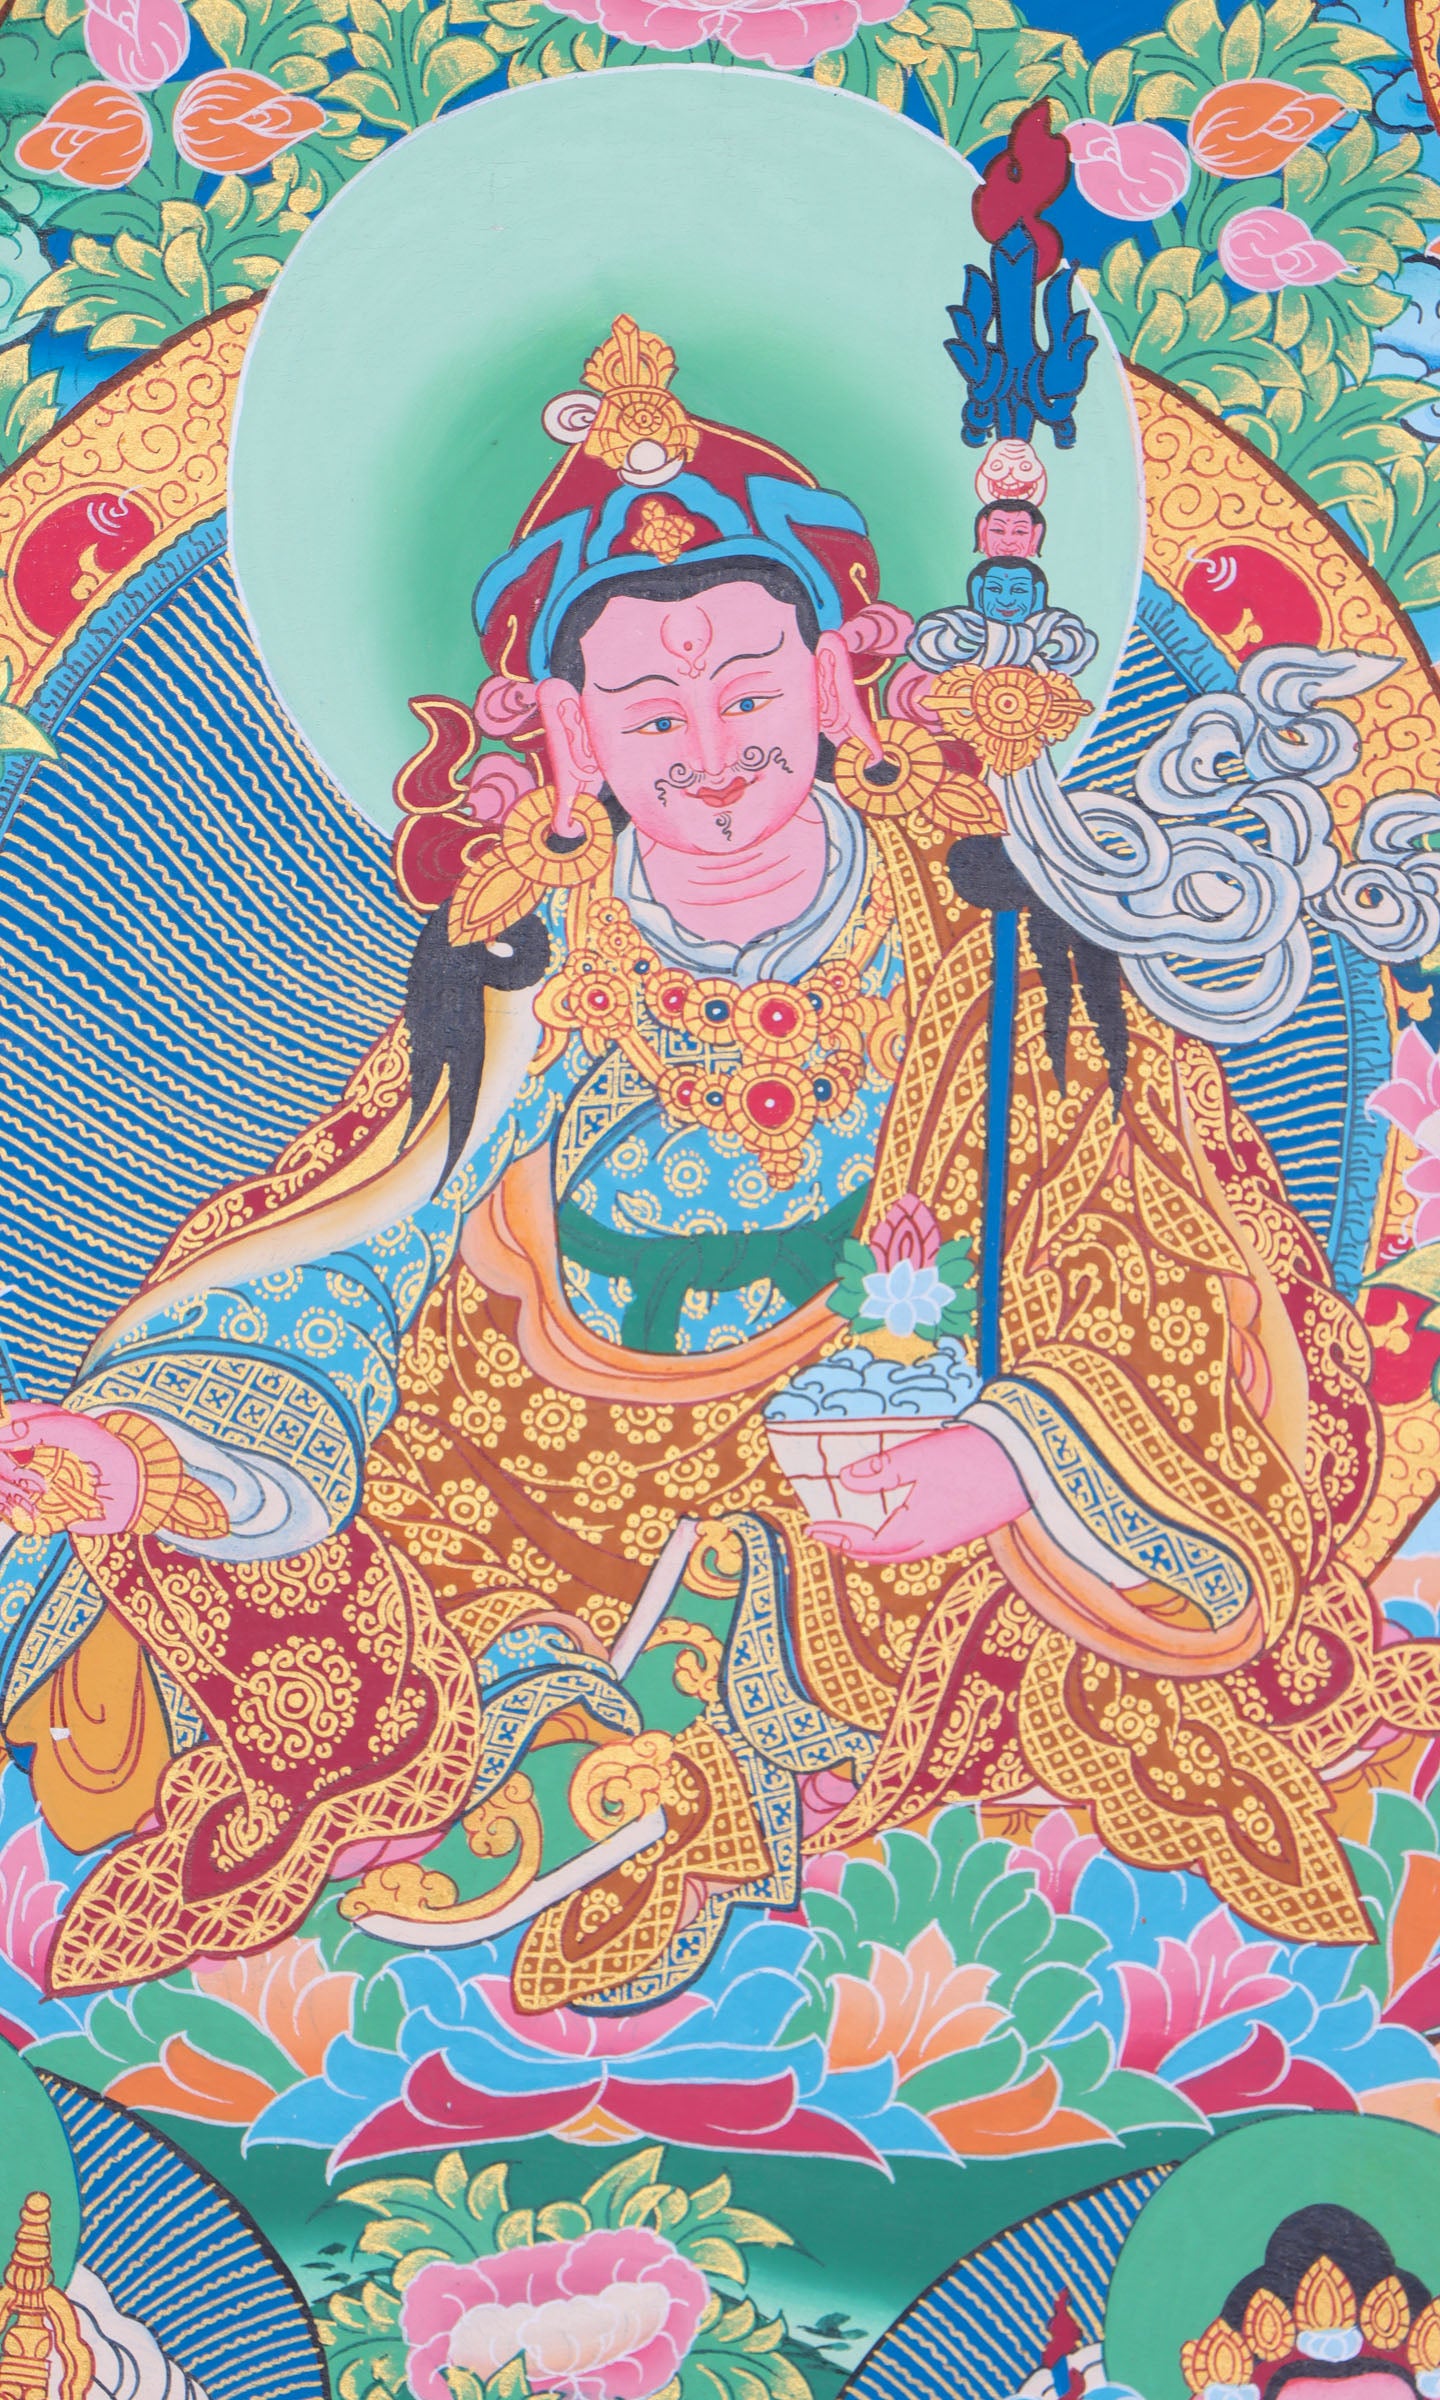 Guru Rinpoche Thangka helps to purify negative karma, and bring about inner peace and well-being.